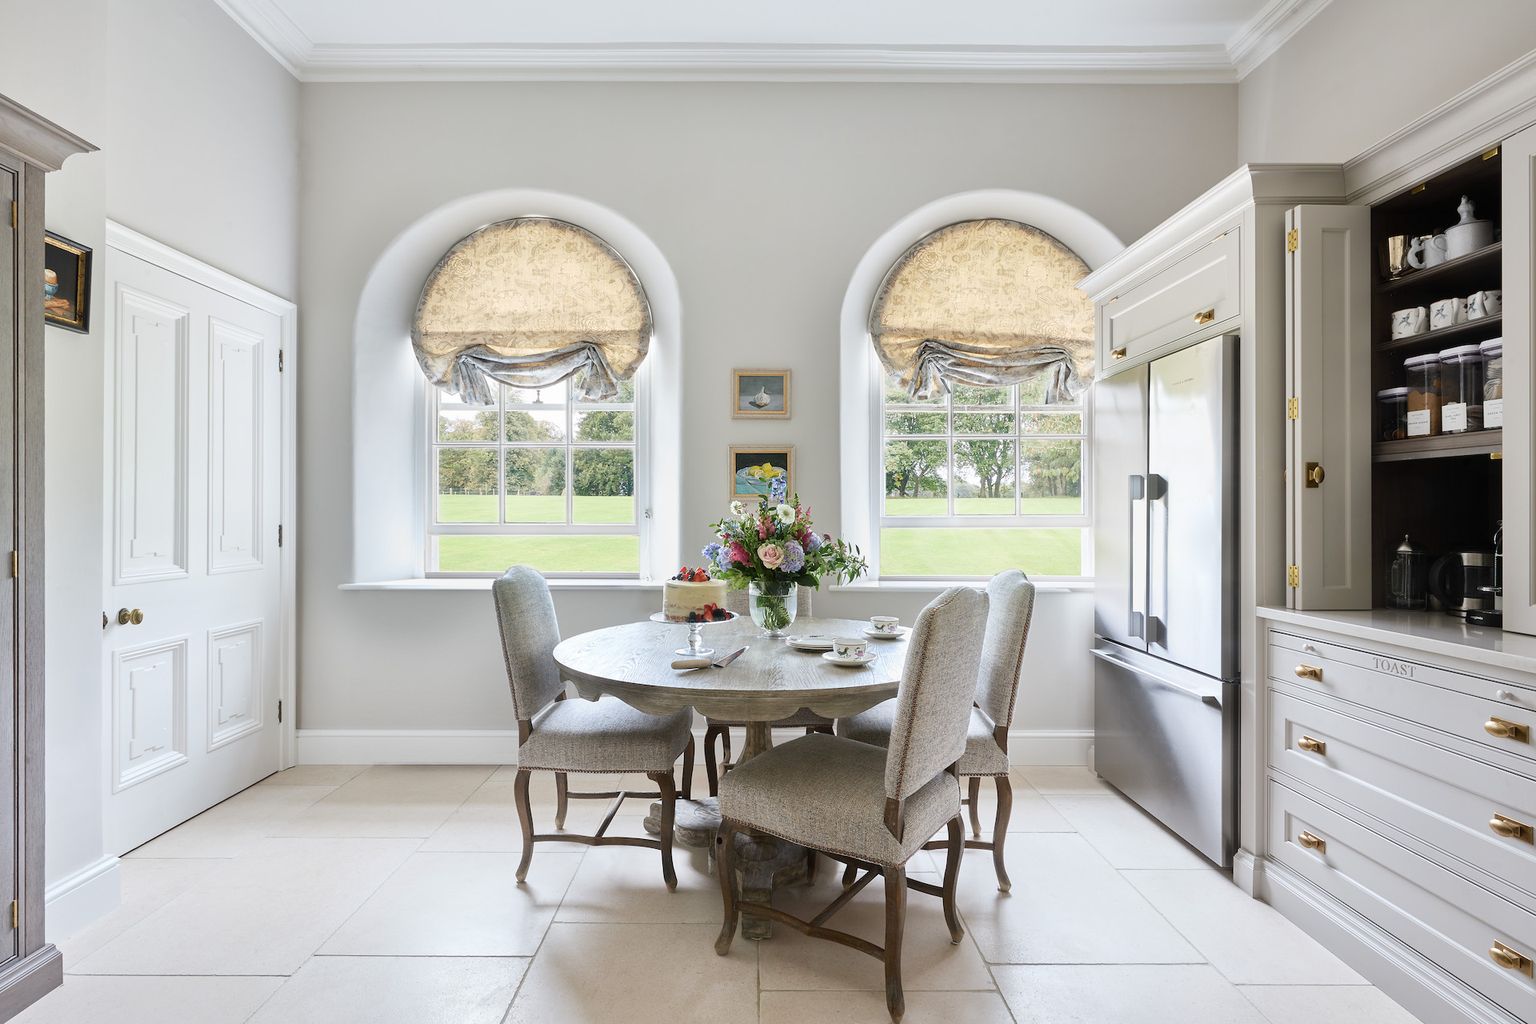 Why Padstow Limestone has the best ‘new neutral’ look and feel…